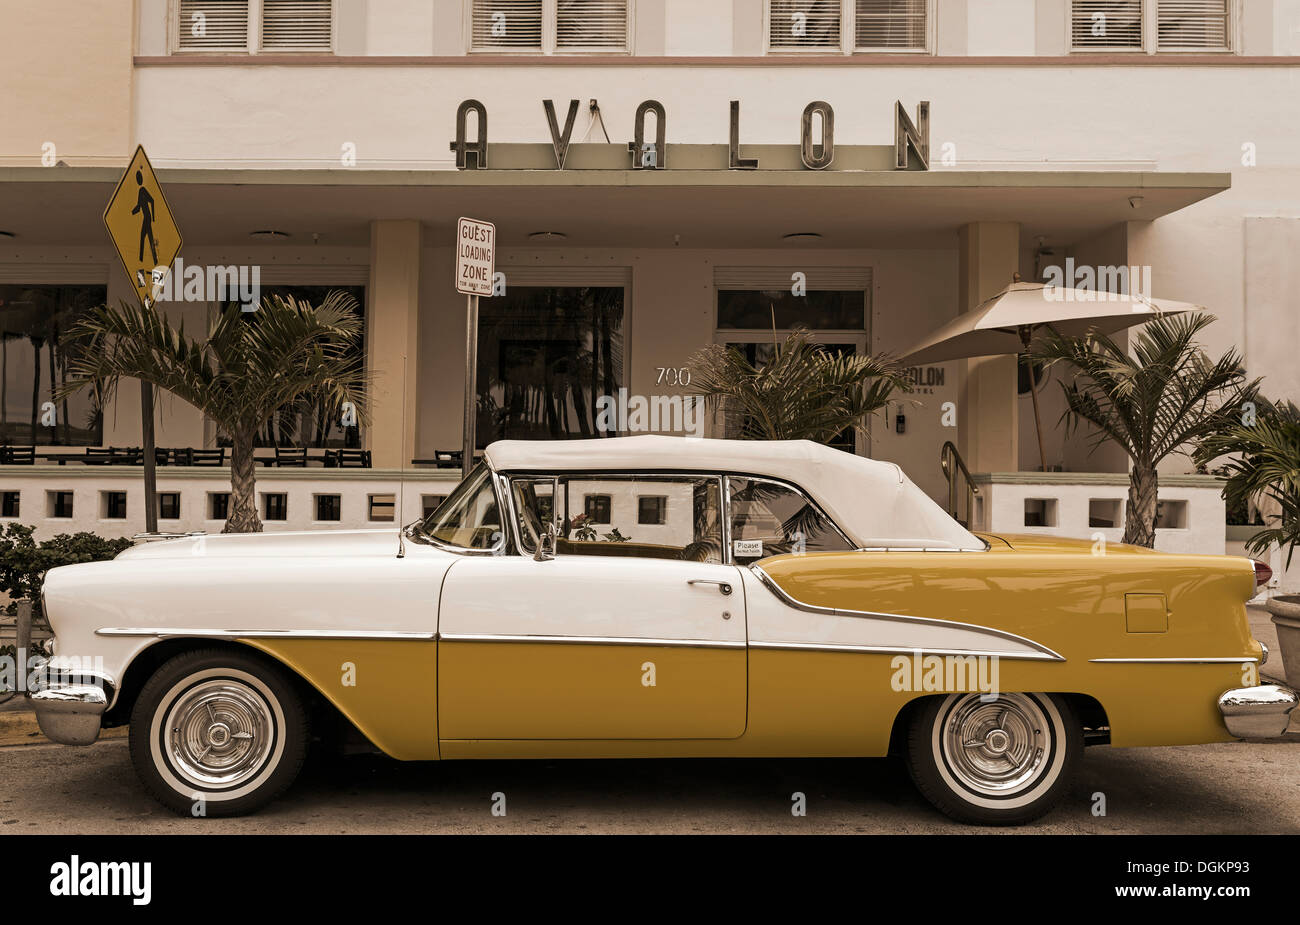 A classic car in front of the Avalon Hotel on Ocean Drive at South Beach in Miami. Stock Photo